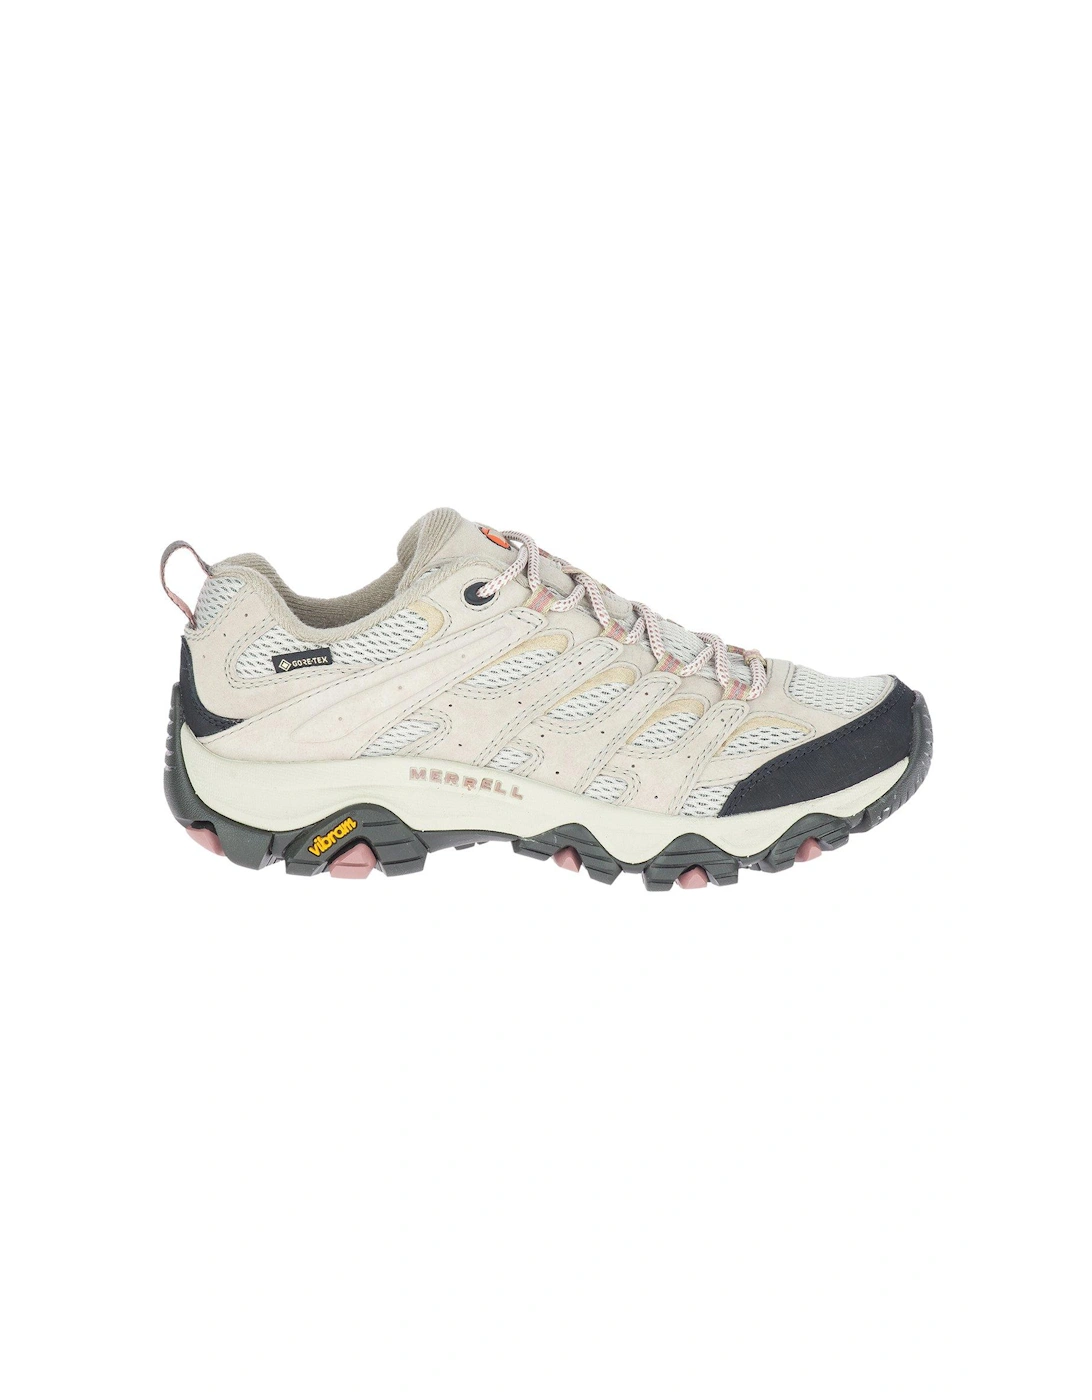 Women's Moab 3 GORE-TEX Hiking Shoes - Off White, 6 of 5